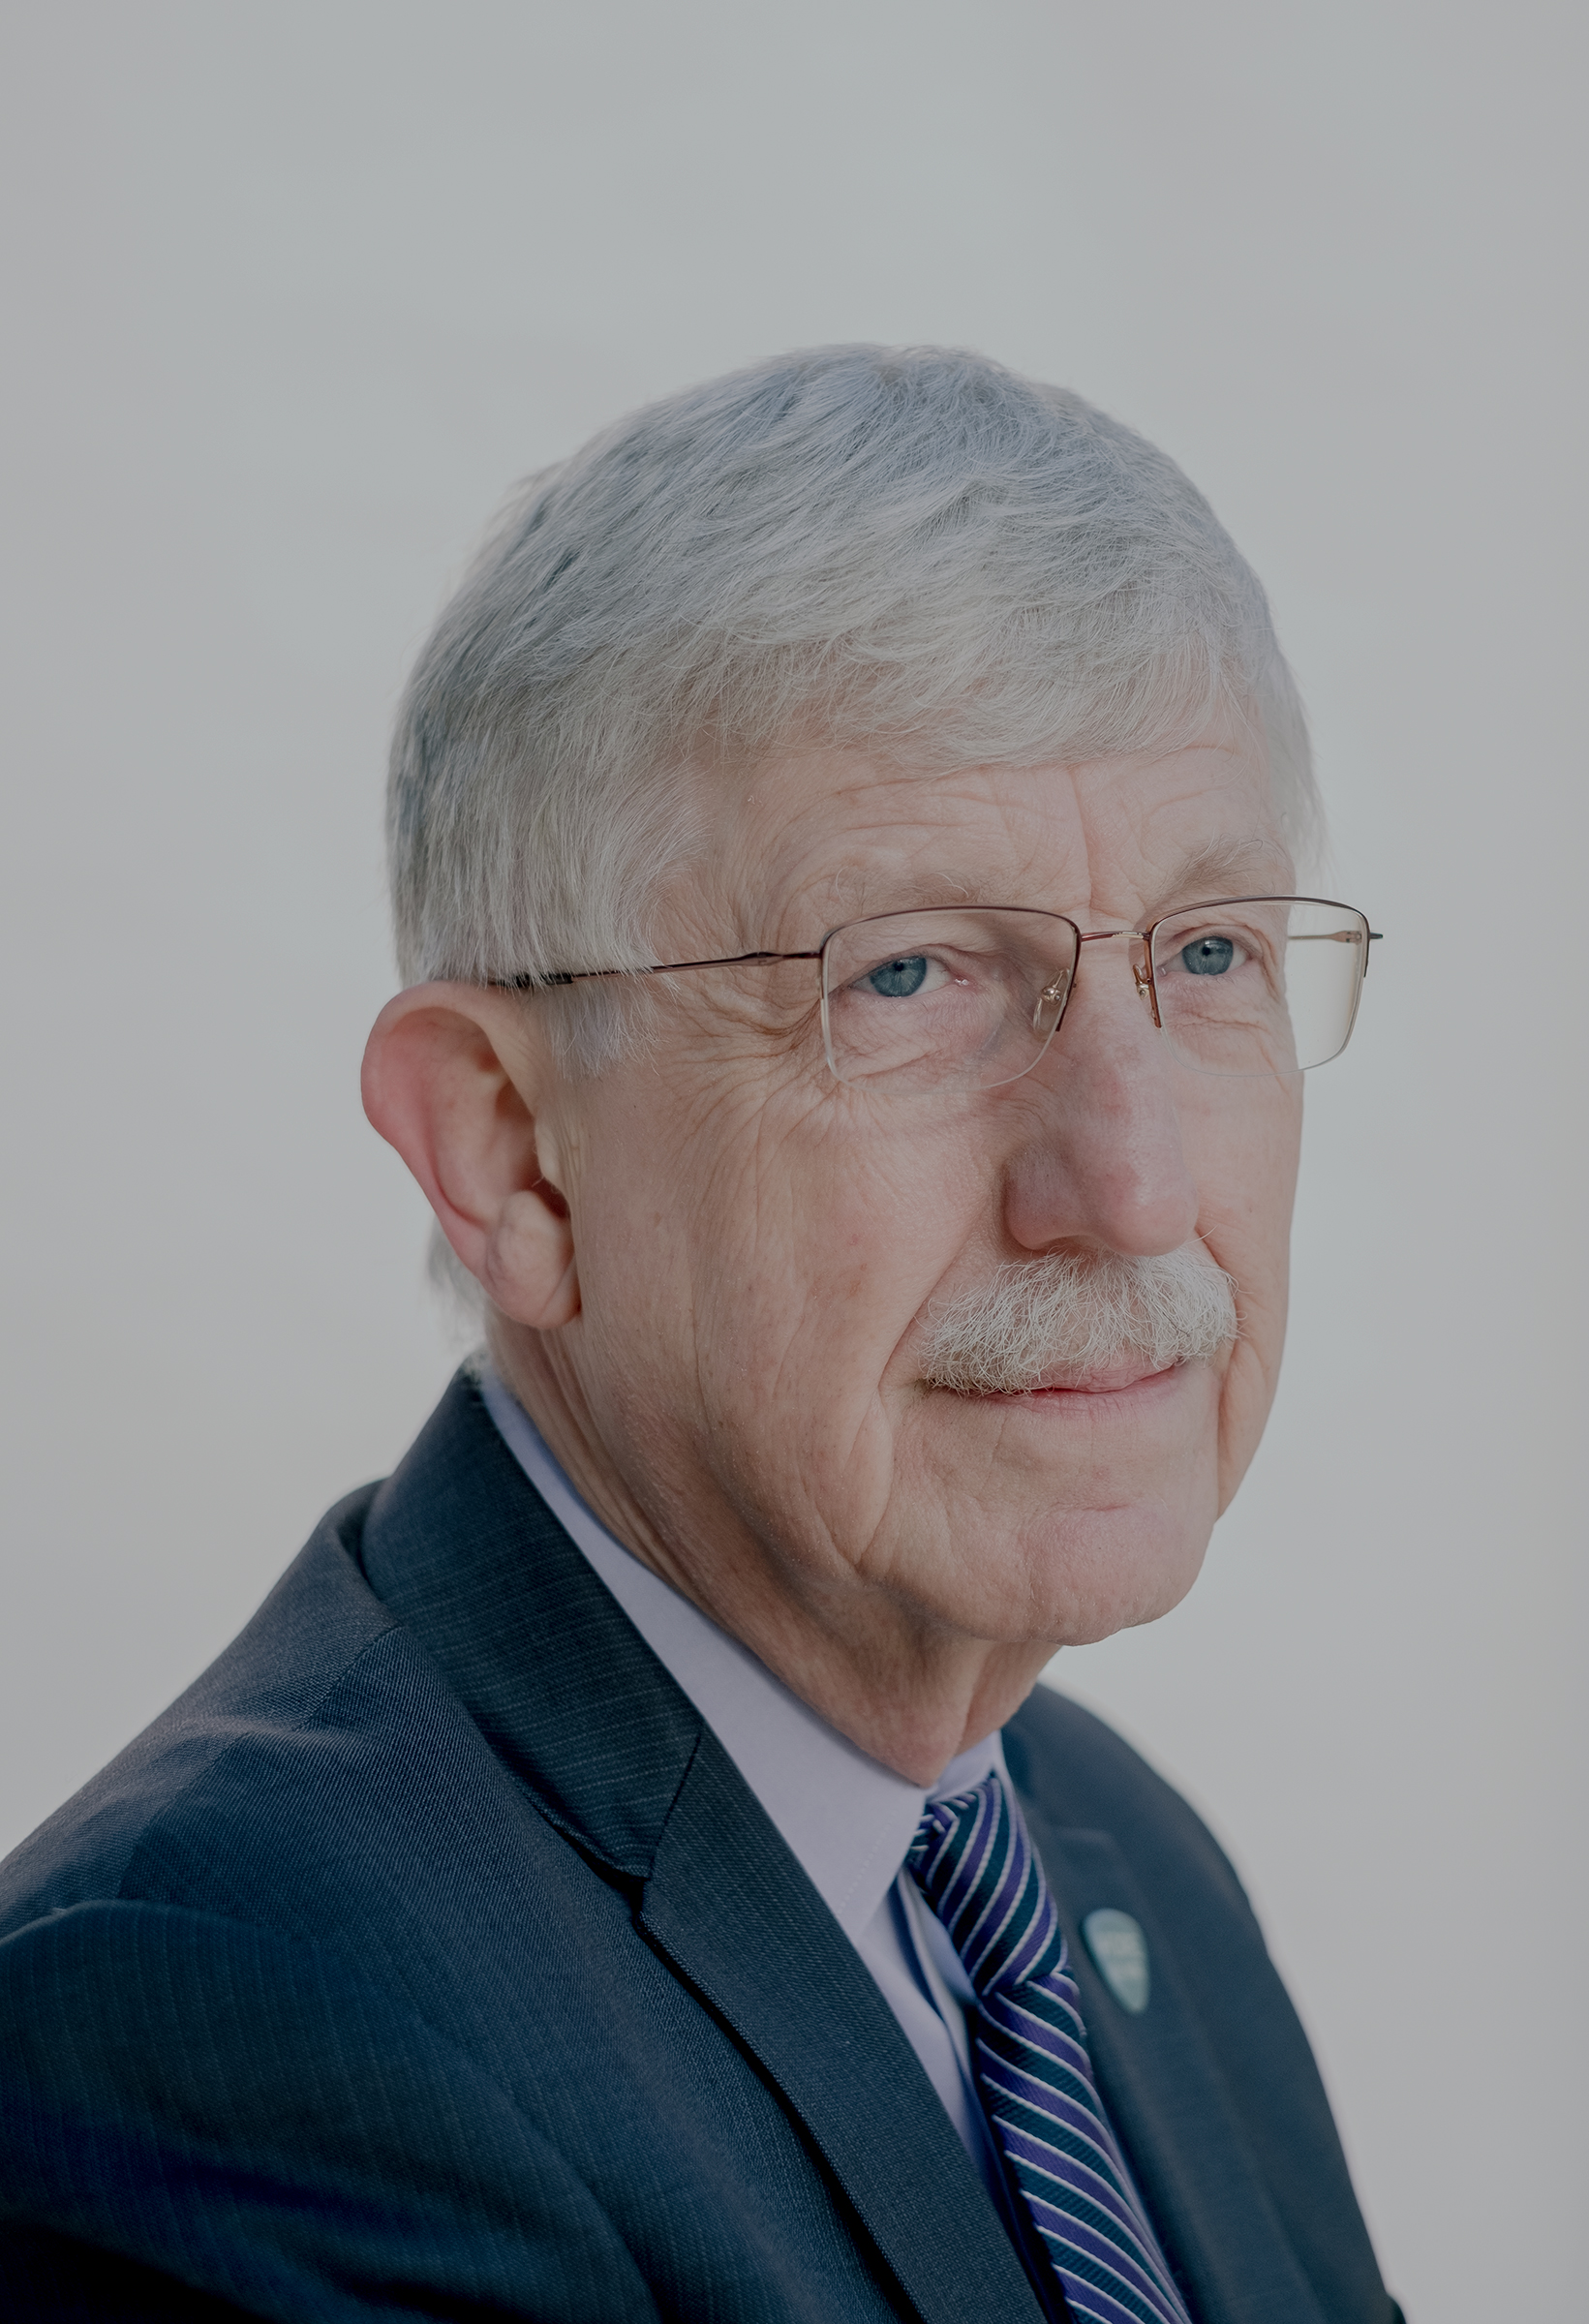 nih-director-francis-collins-interview-01-featured-vertical